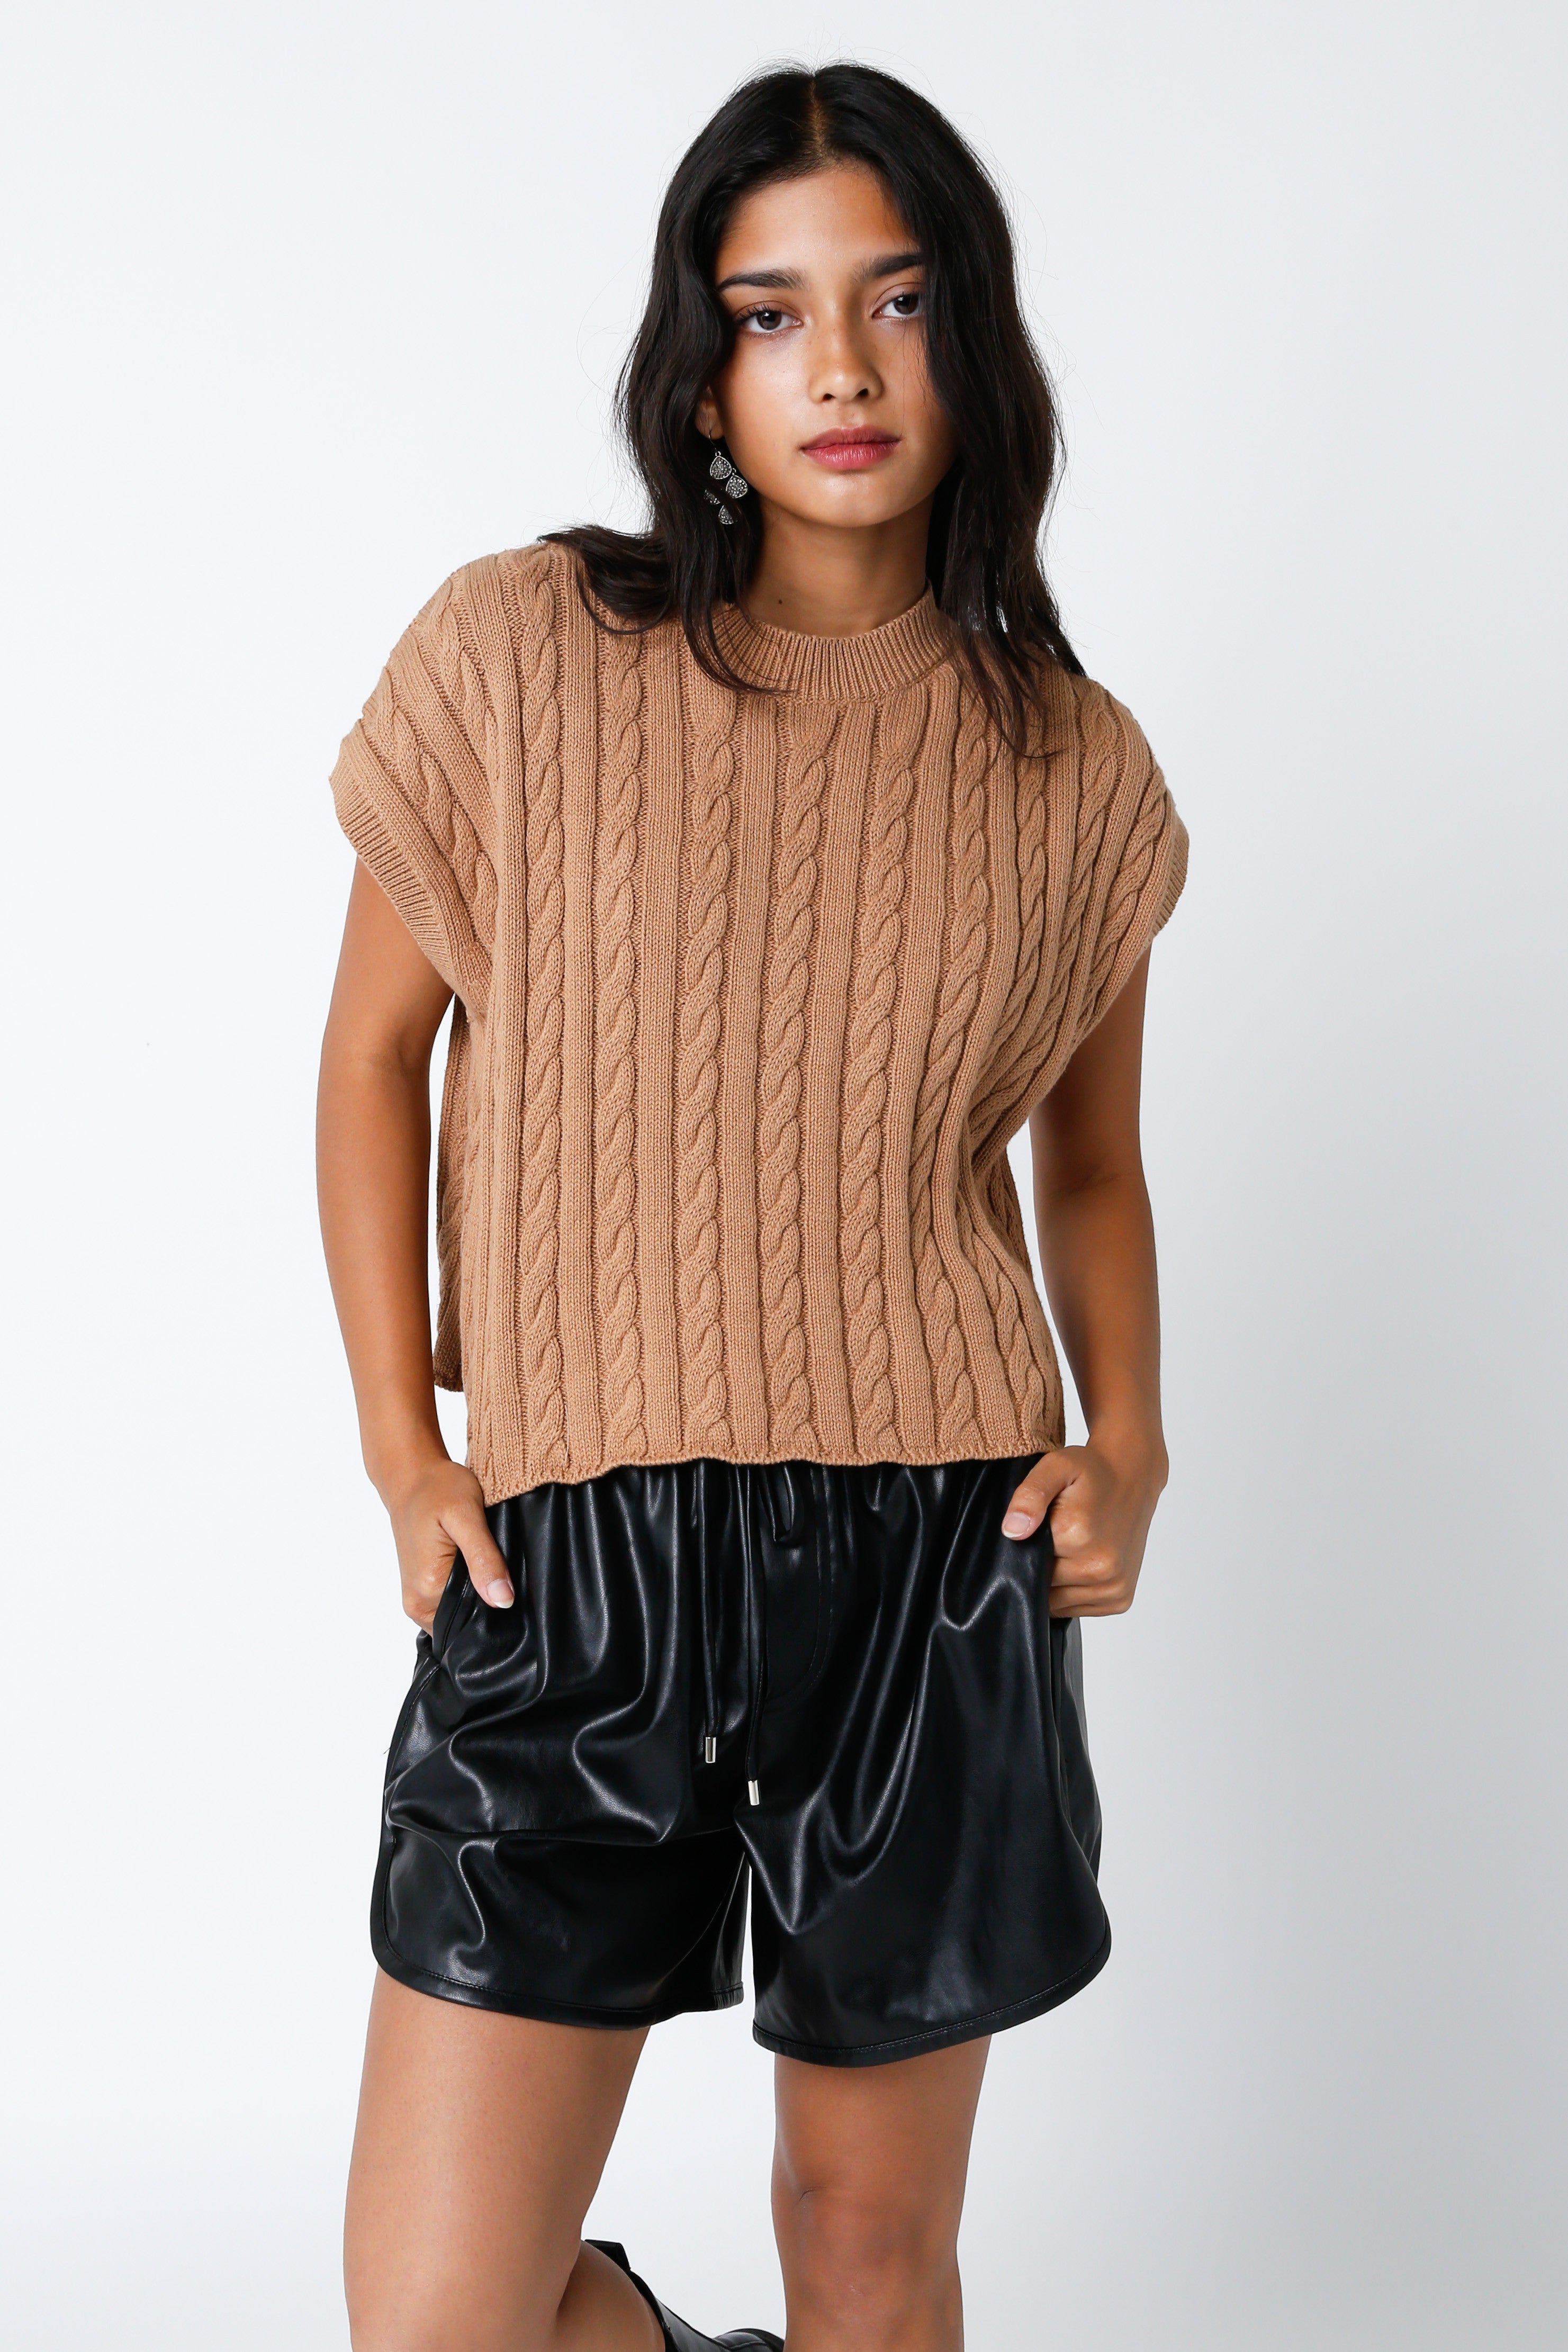 Carry Sweater Top